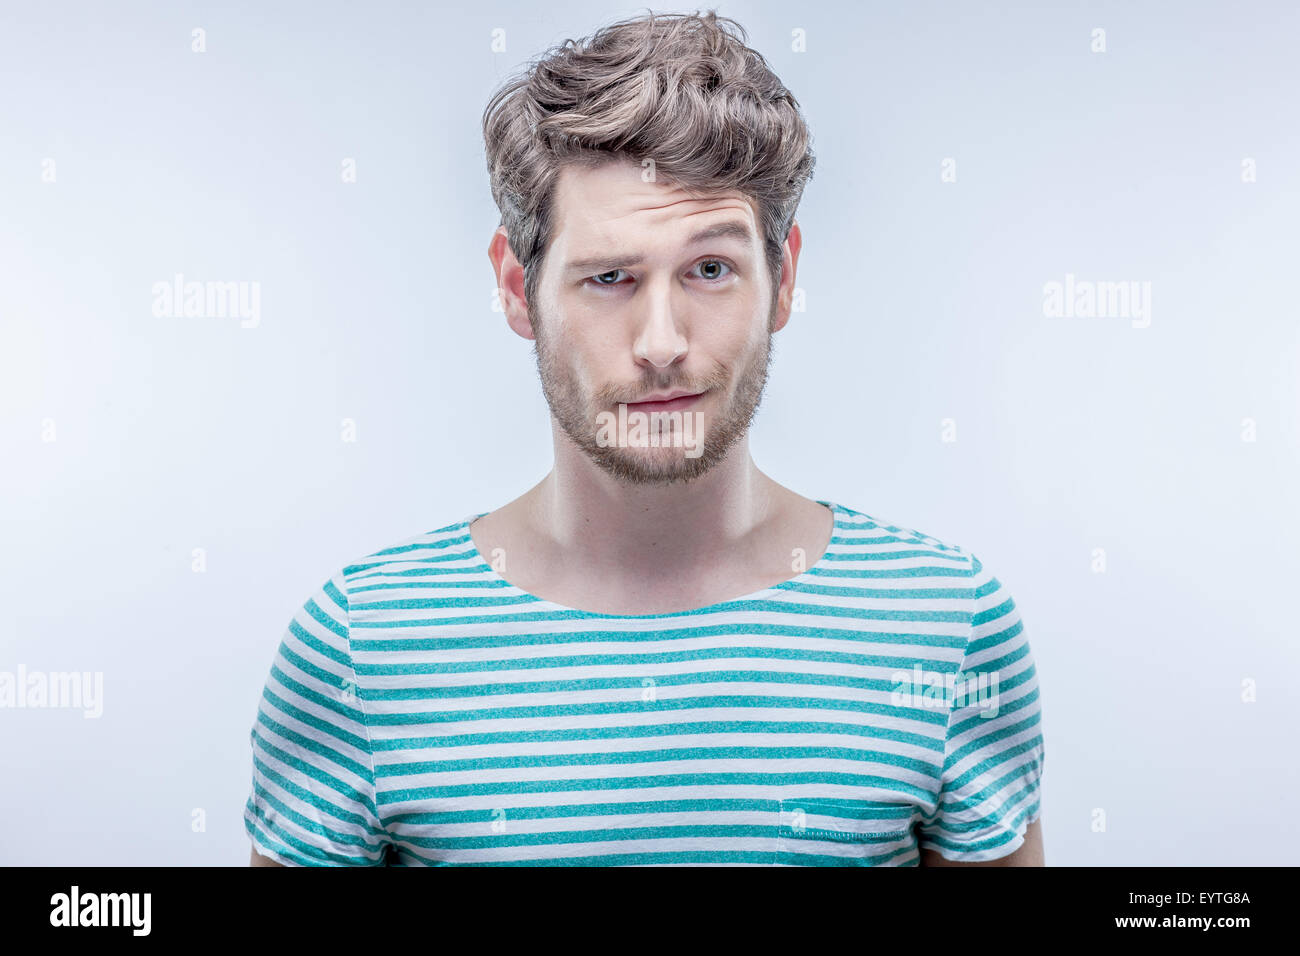 Young man looking doubtfully Stock Photo